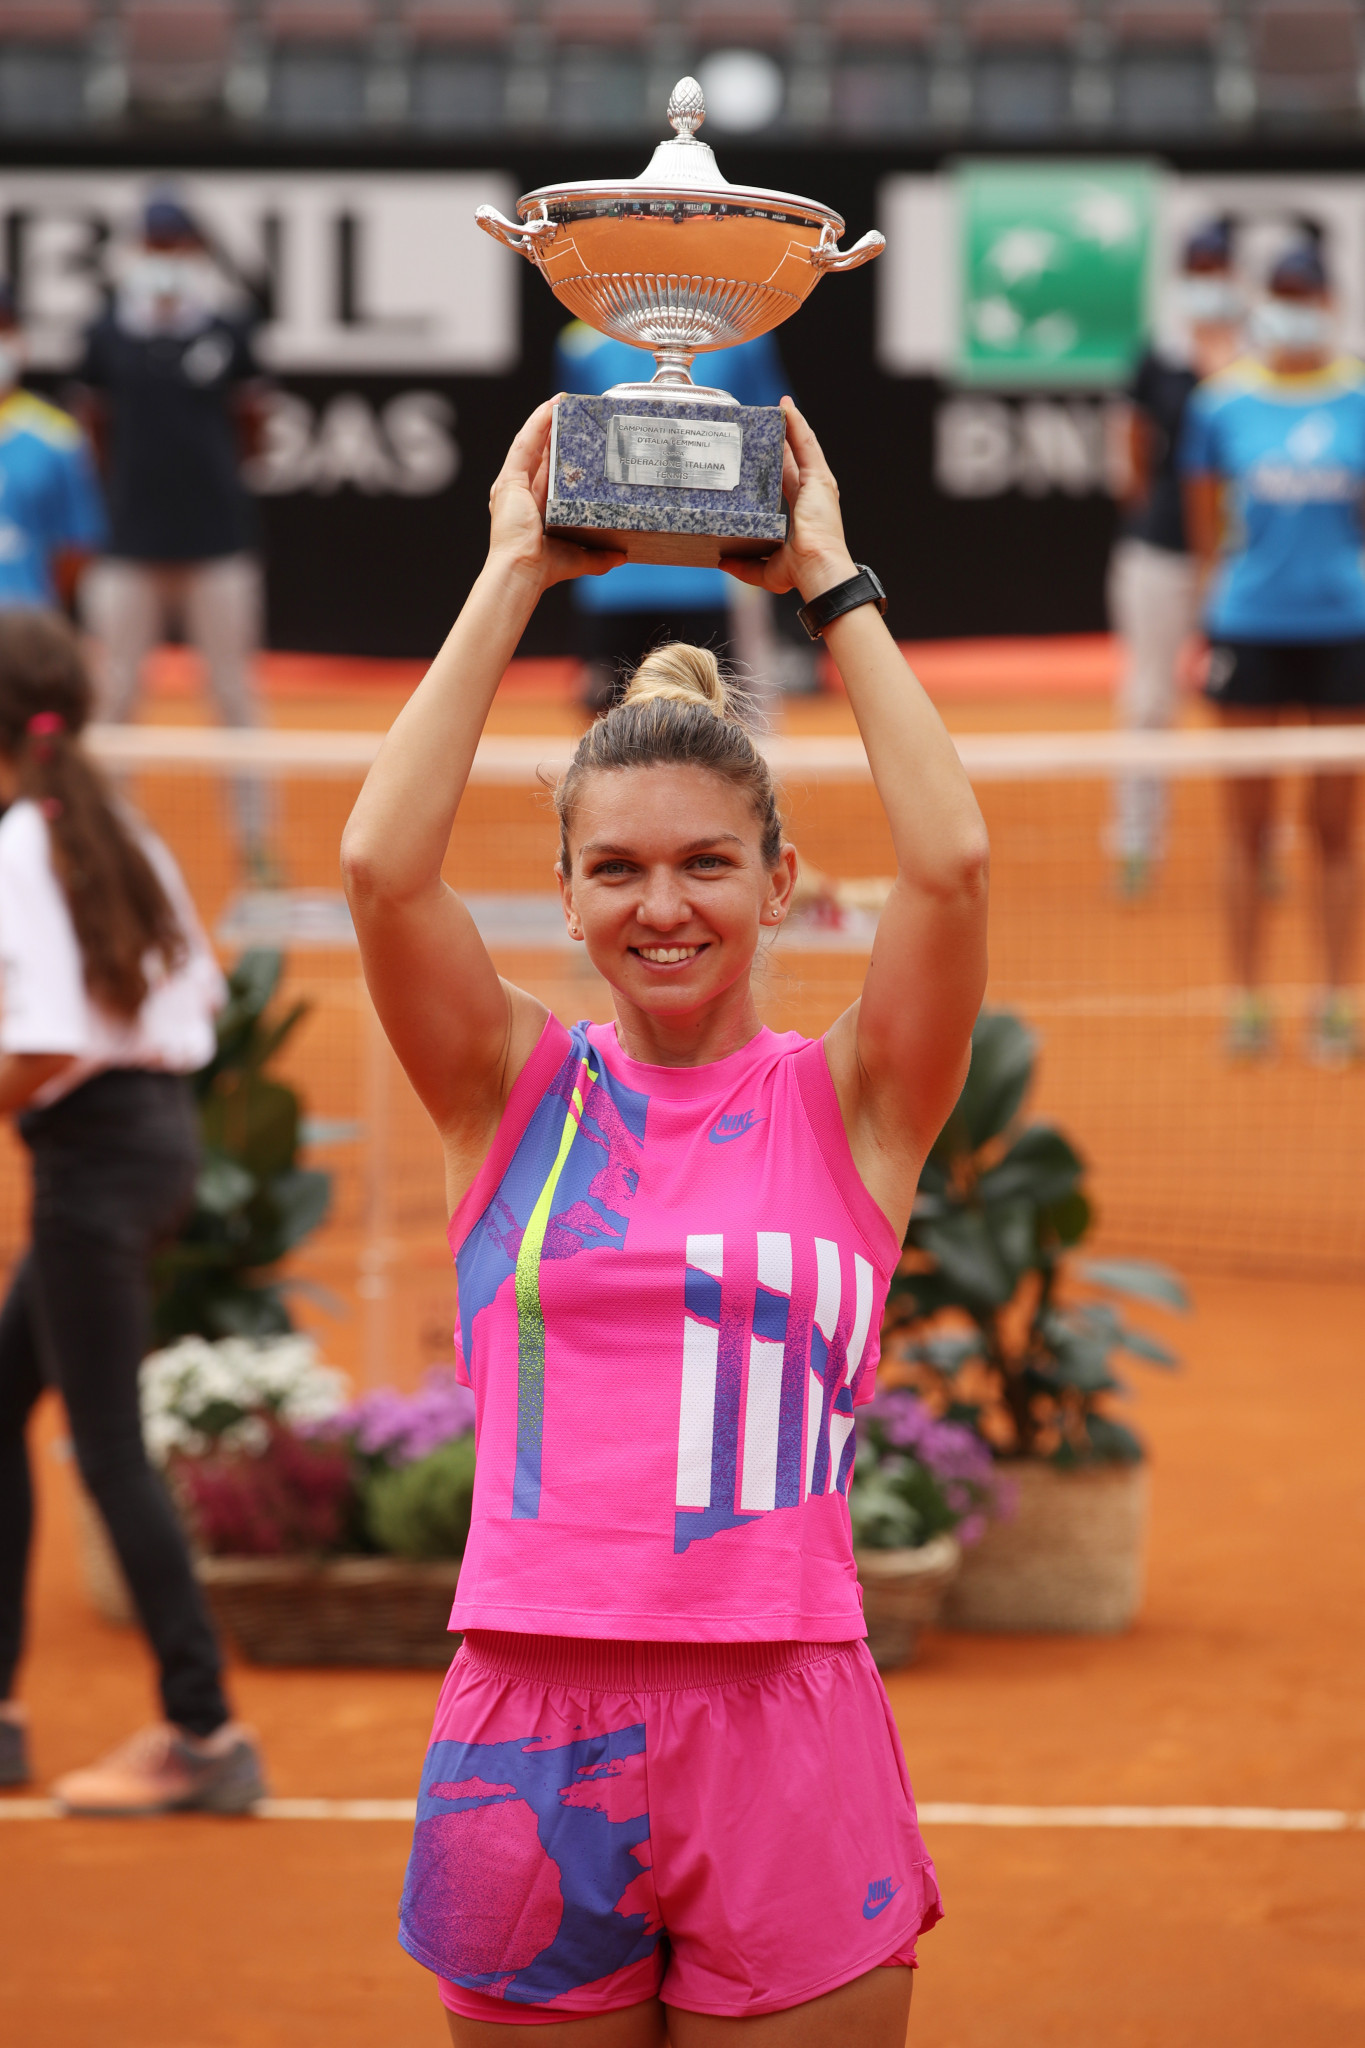 Halep has won tournaments in Rome and Prague since the WTA Tour resumed following the shutdown caused by COVID-19 ©Getty Images